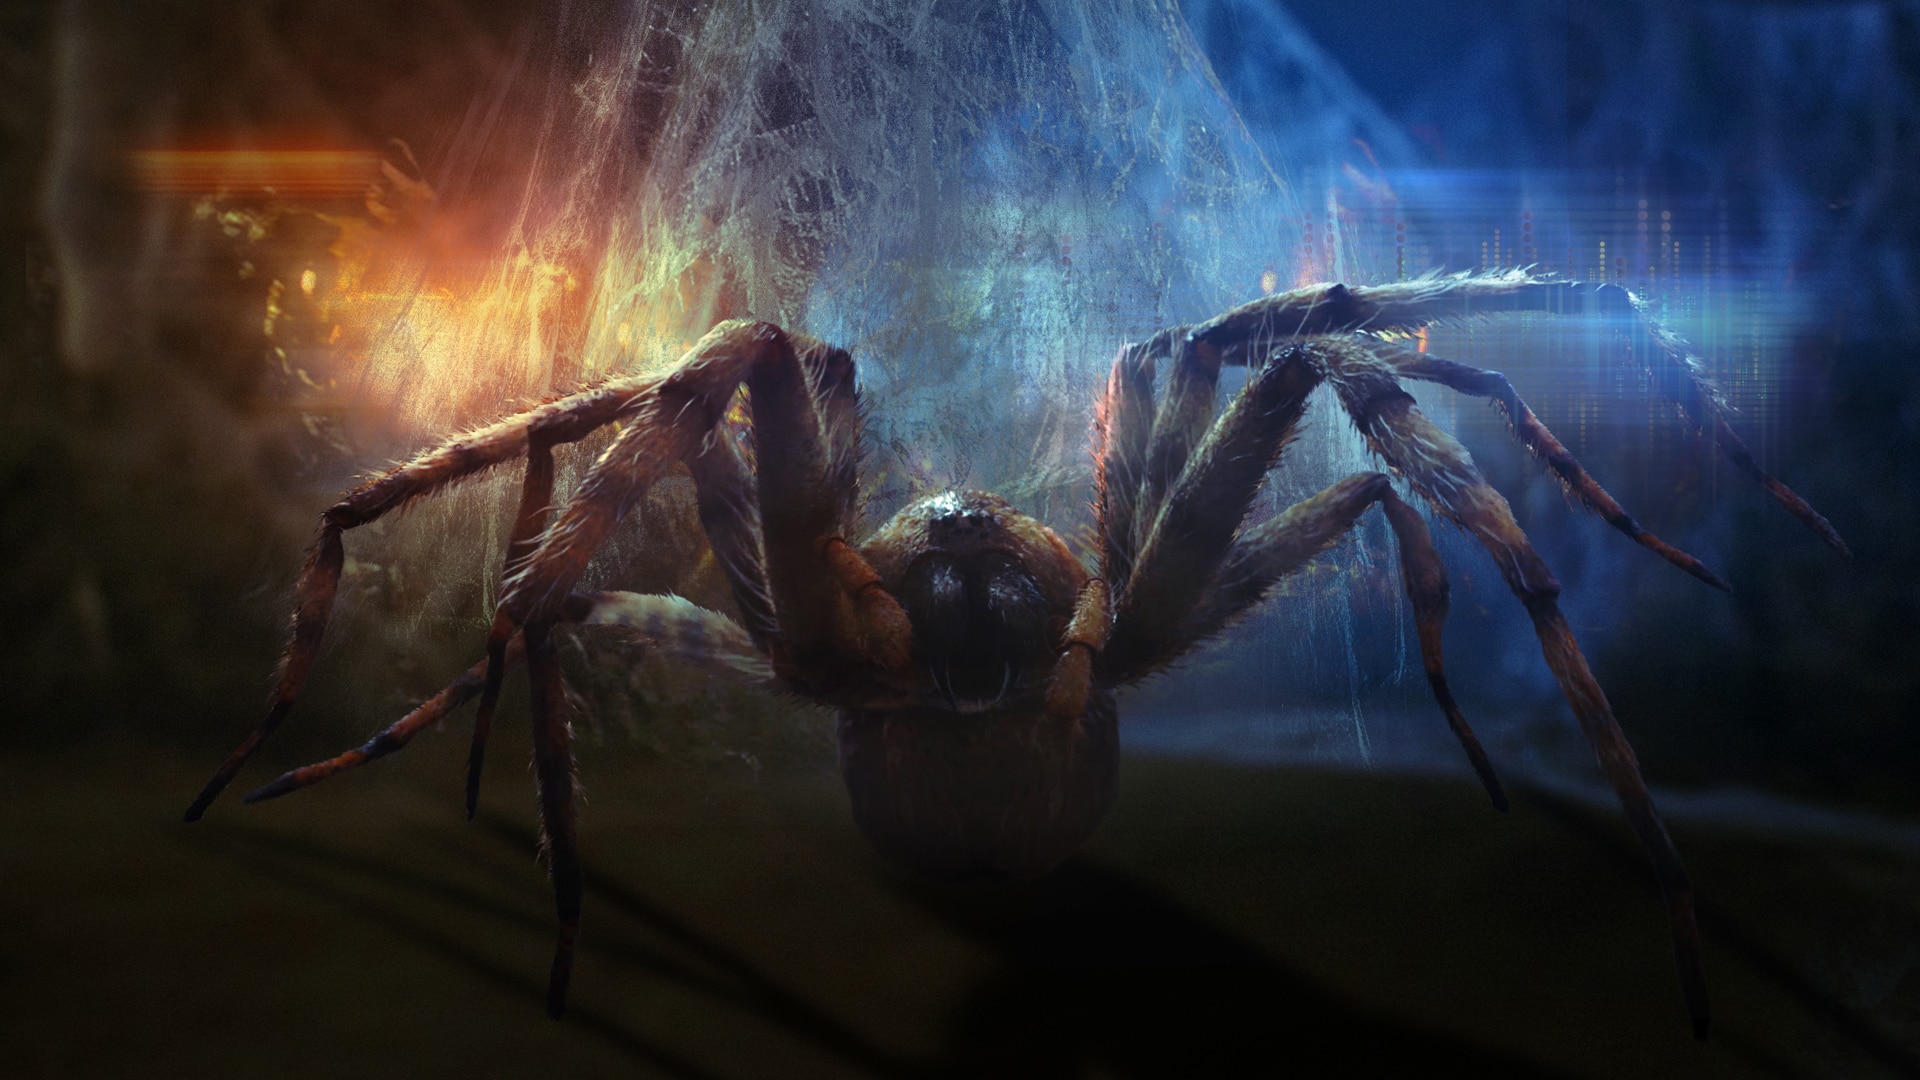 Mutant Spiders | Doctor Who | Doctor Who